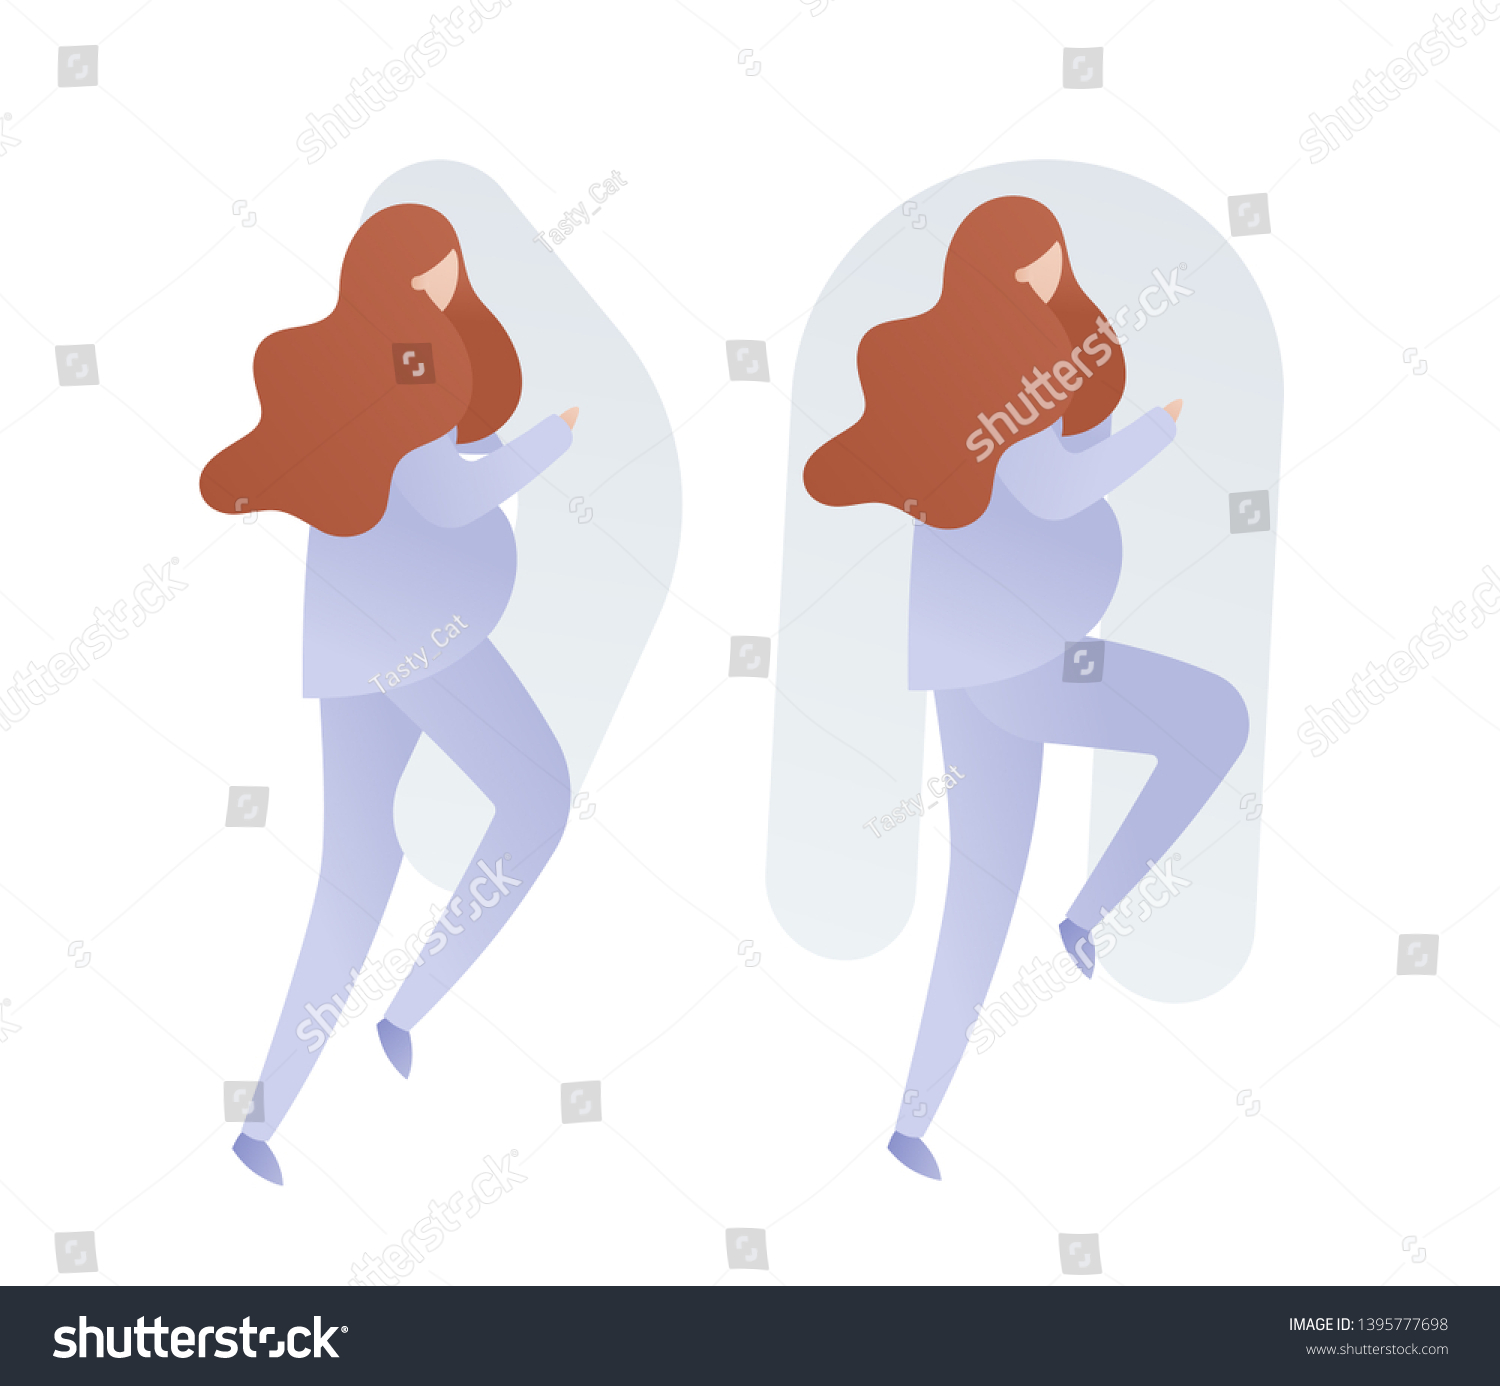 SVG of Vector flat modern character set of illustration. Pregnant redhead woman sleeping on maternity pillow in pajamas isolated on white. Concept of safe and comfort sleeping in bed, dream, baby caring. svg